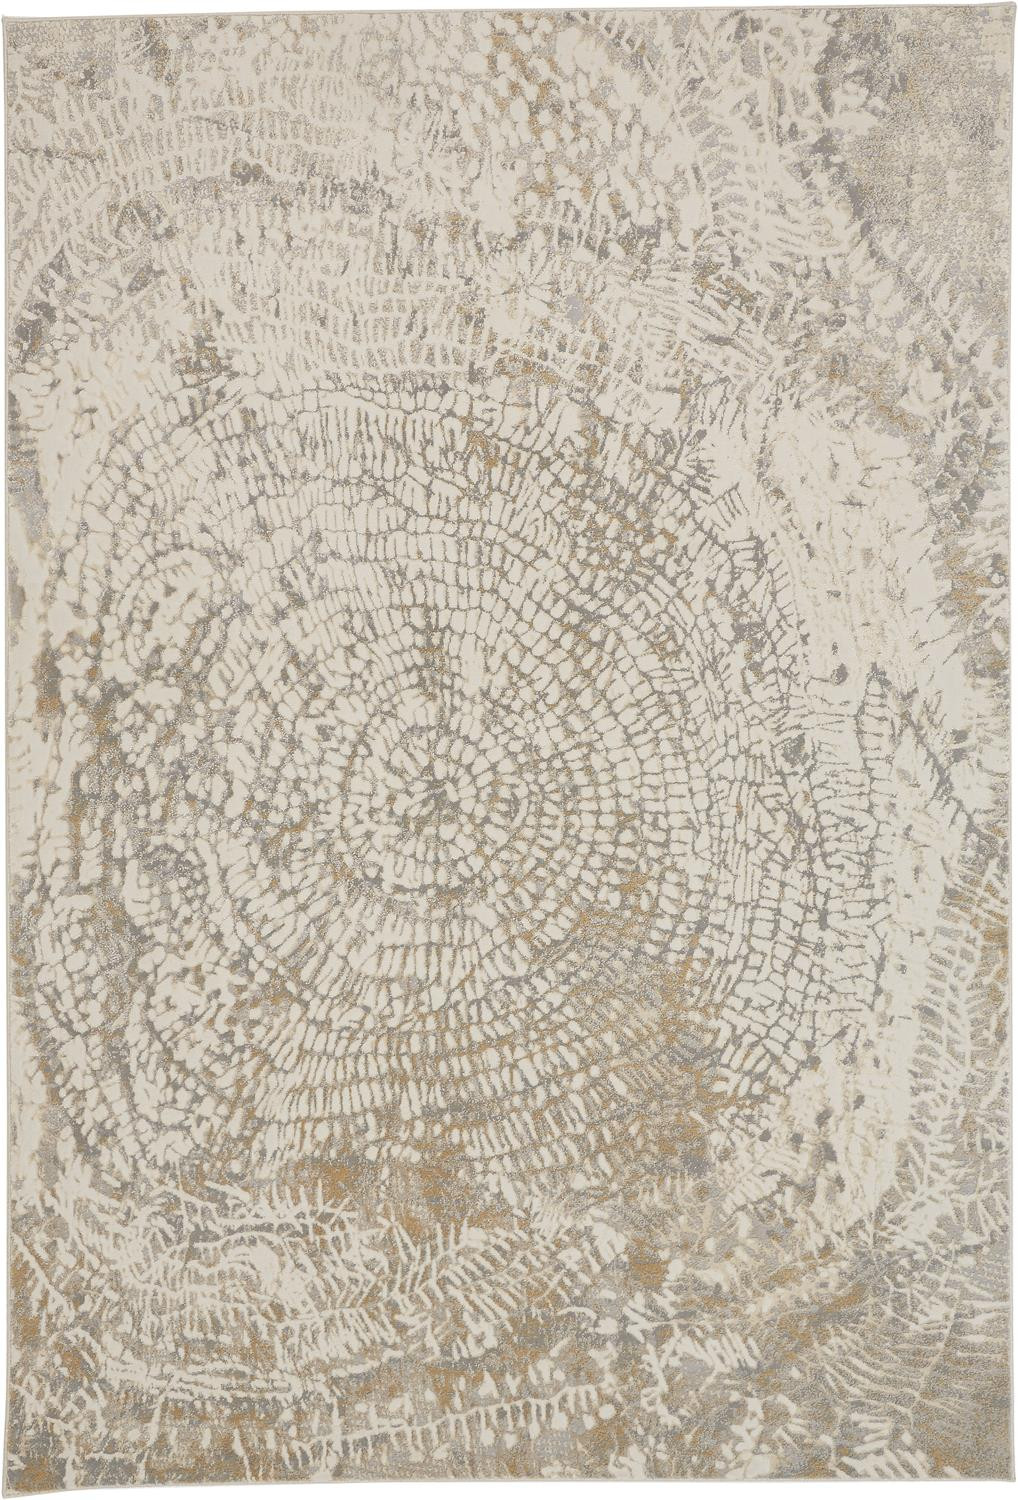 9' X 12' Ivory Tan And Gray Abstract Area Rug-514698-1